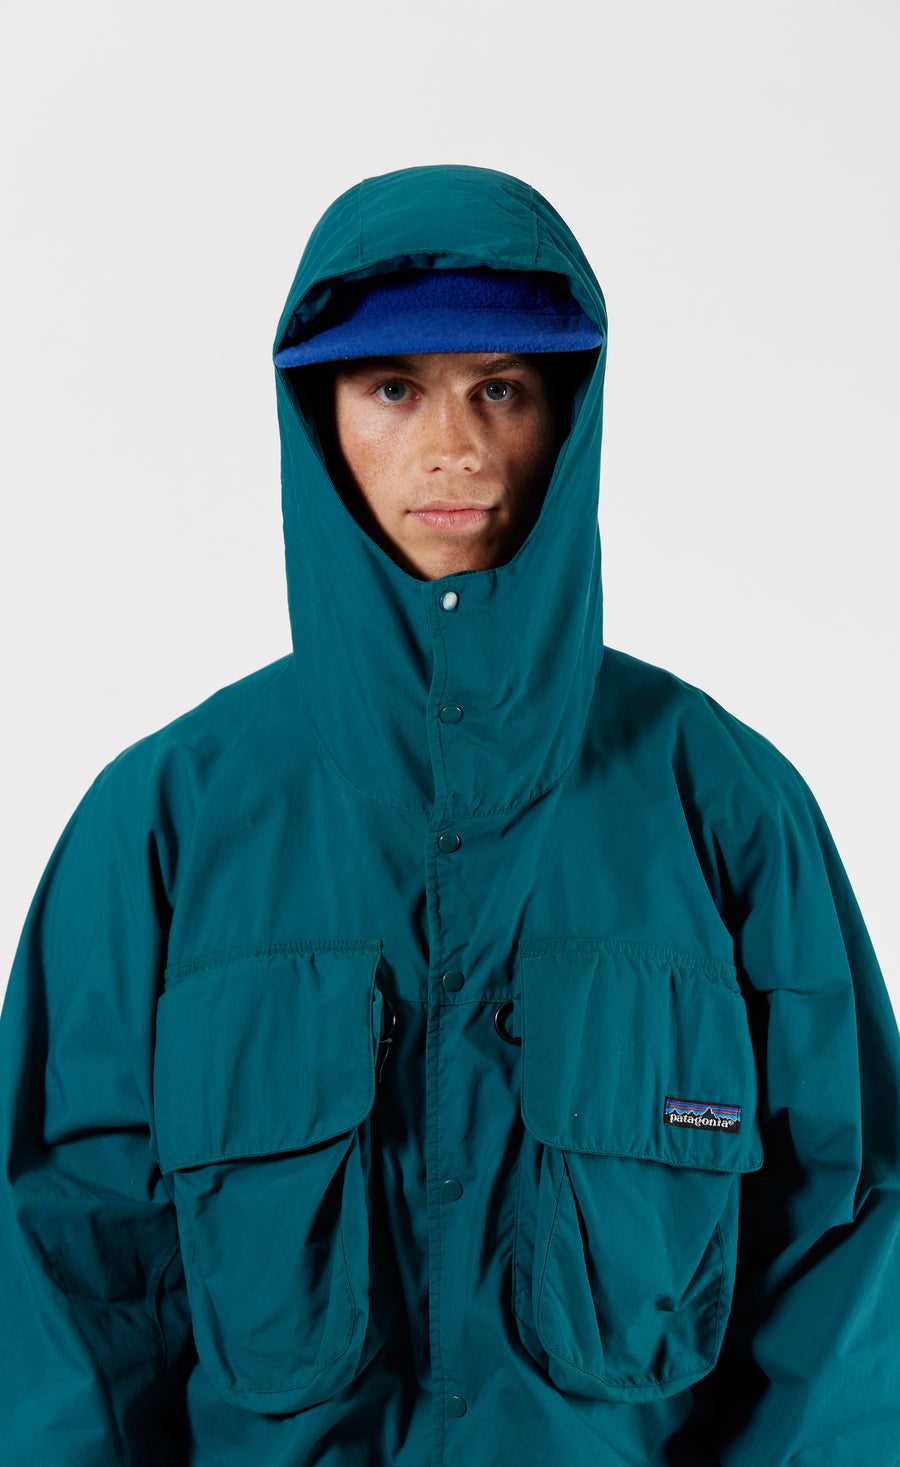 Patagonia SST Fishing Jacket in a vintage style from thrift store Twise Studio